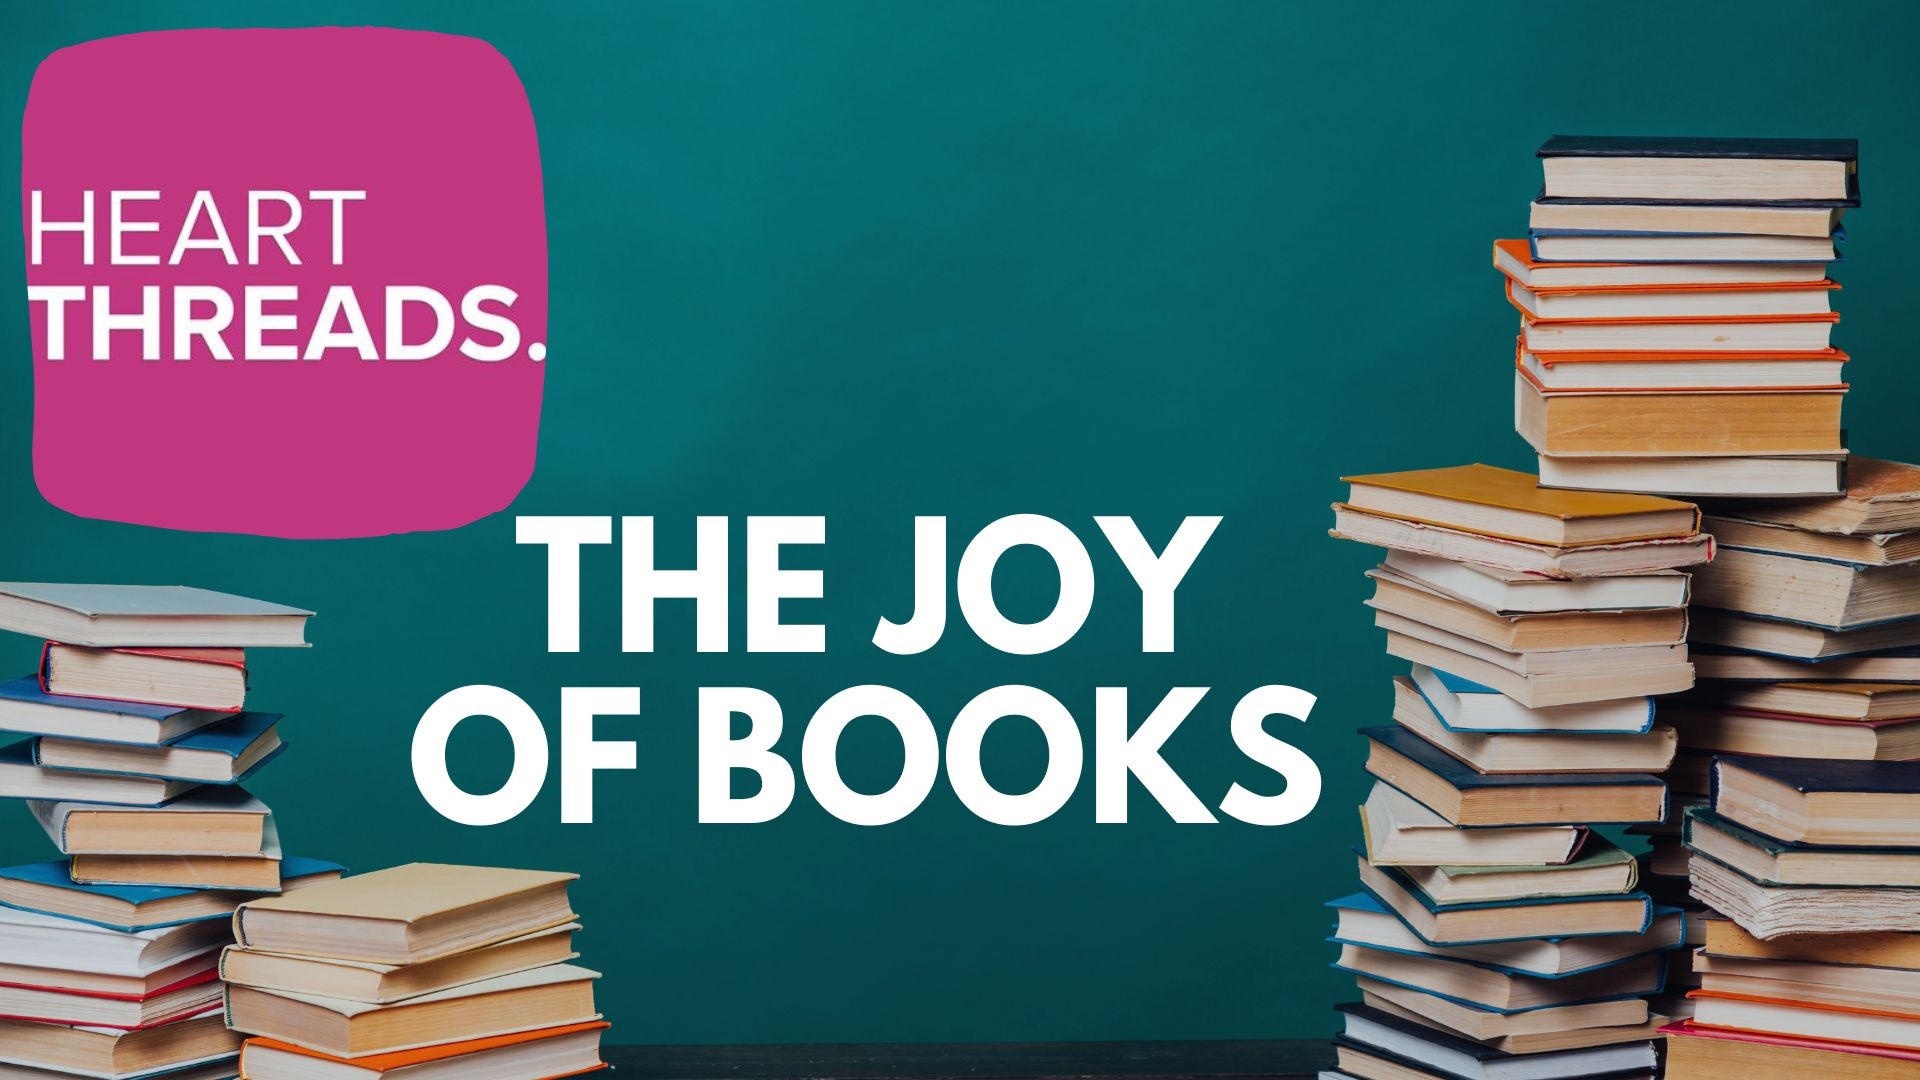 A collection of heartwarming stories over the joy books bring to our lives and their benefits for kids and people of all ages.